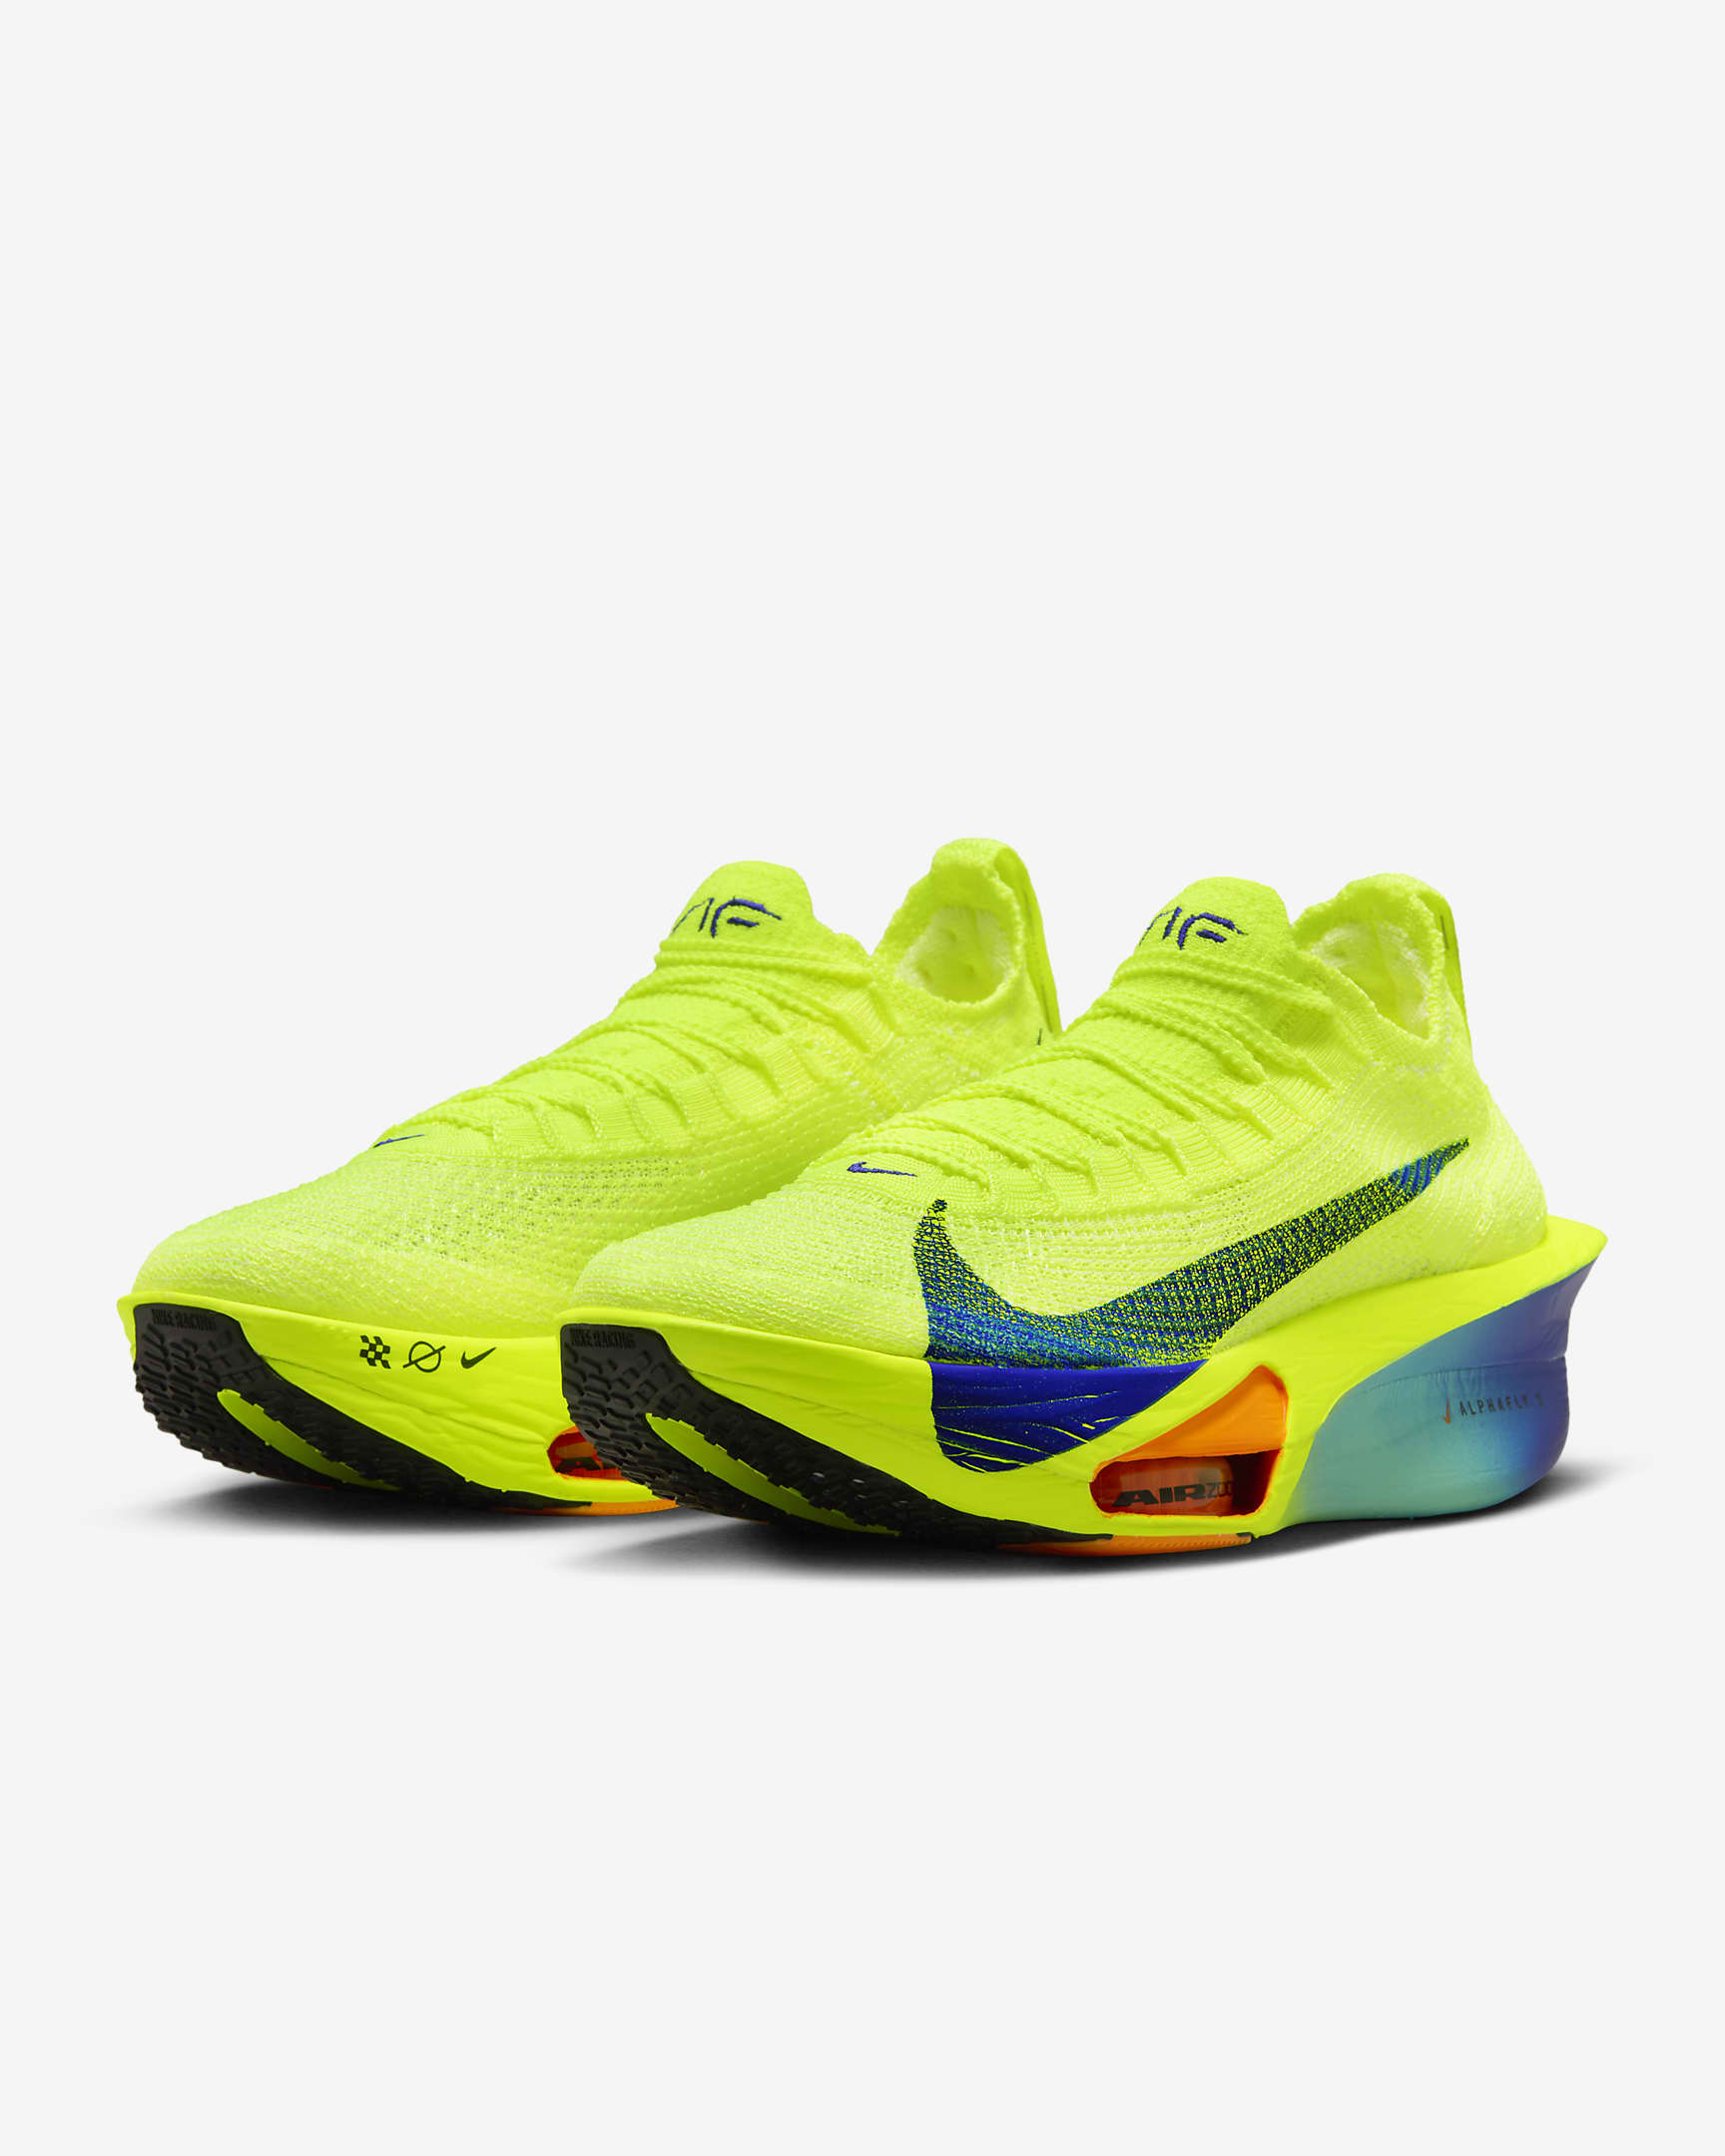 Nike Men's Alphafly 3 Running Shoes (Volt/Dusty Cactus/Total Orange/Concord) $285 + Free Shipping